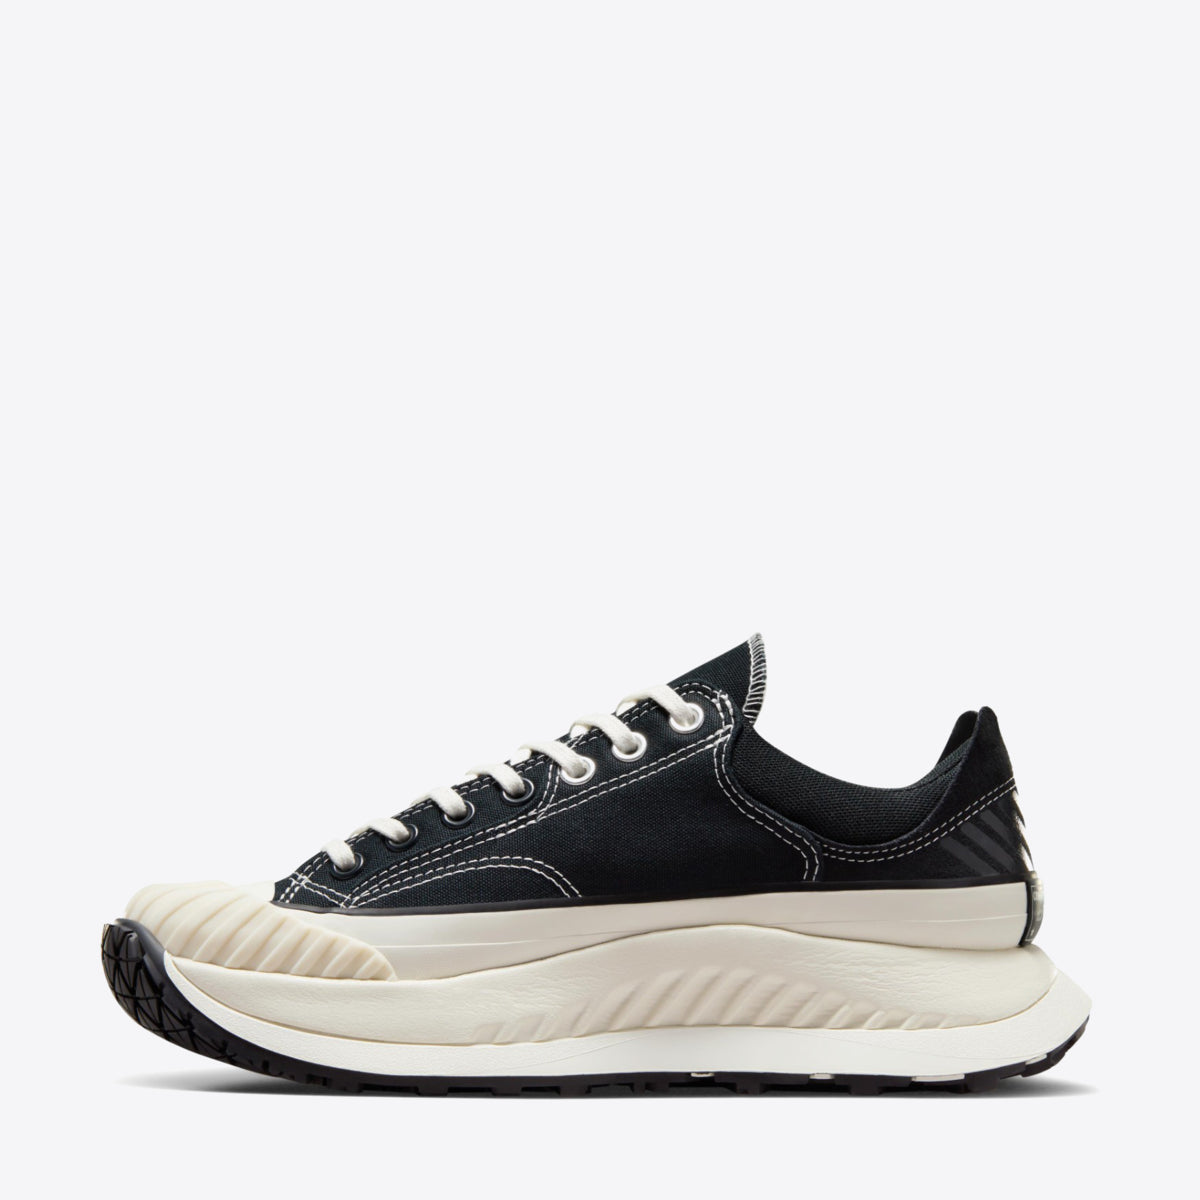 CONVERSE CT 70 AT Future Utility Low Black - Image 3